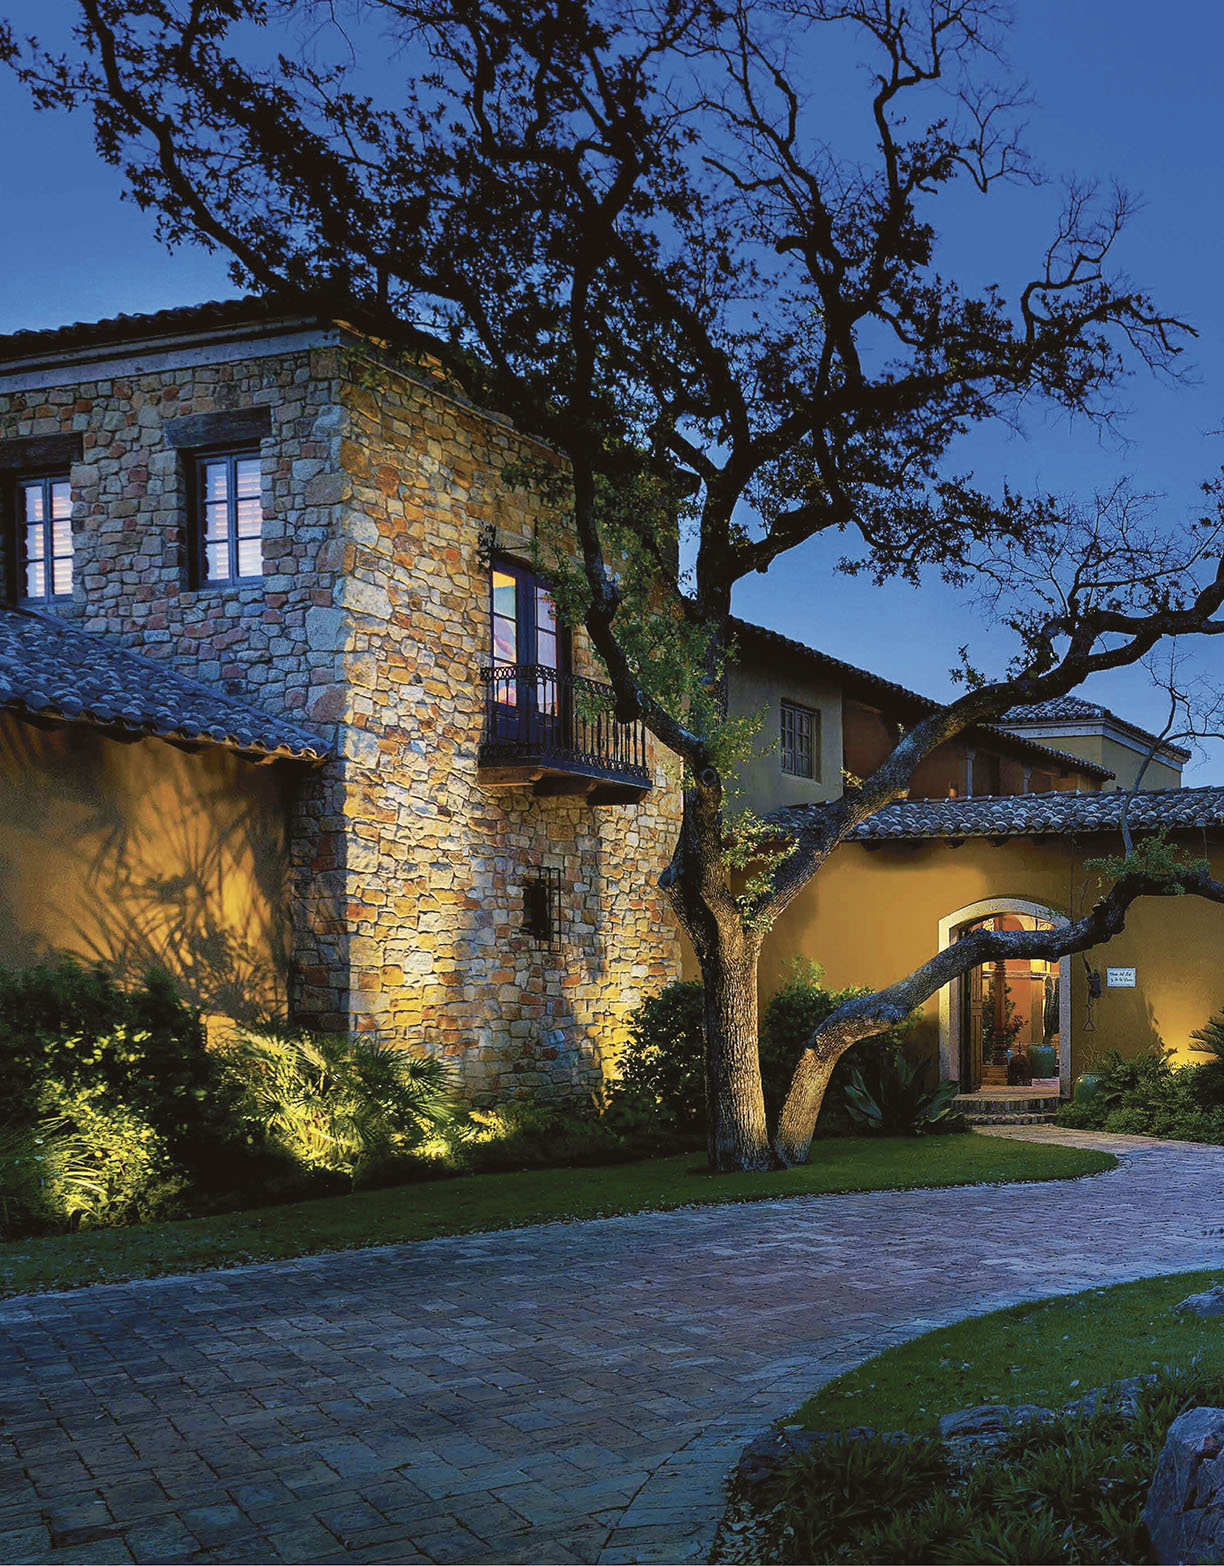 Make Your Home Festive With Landscape Lighting